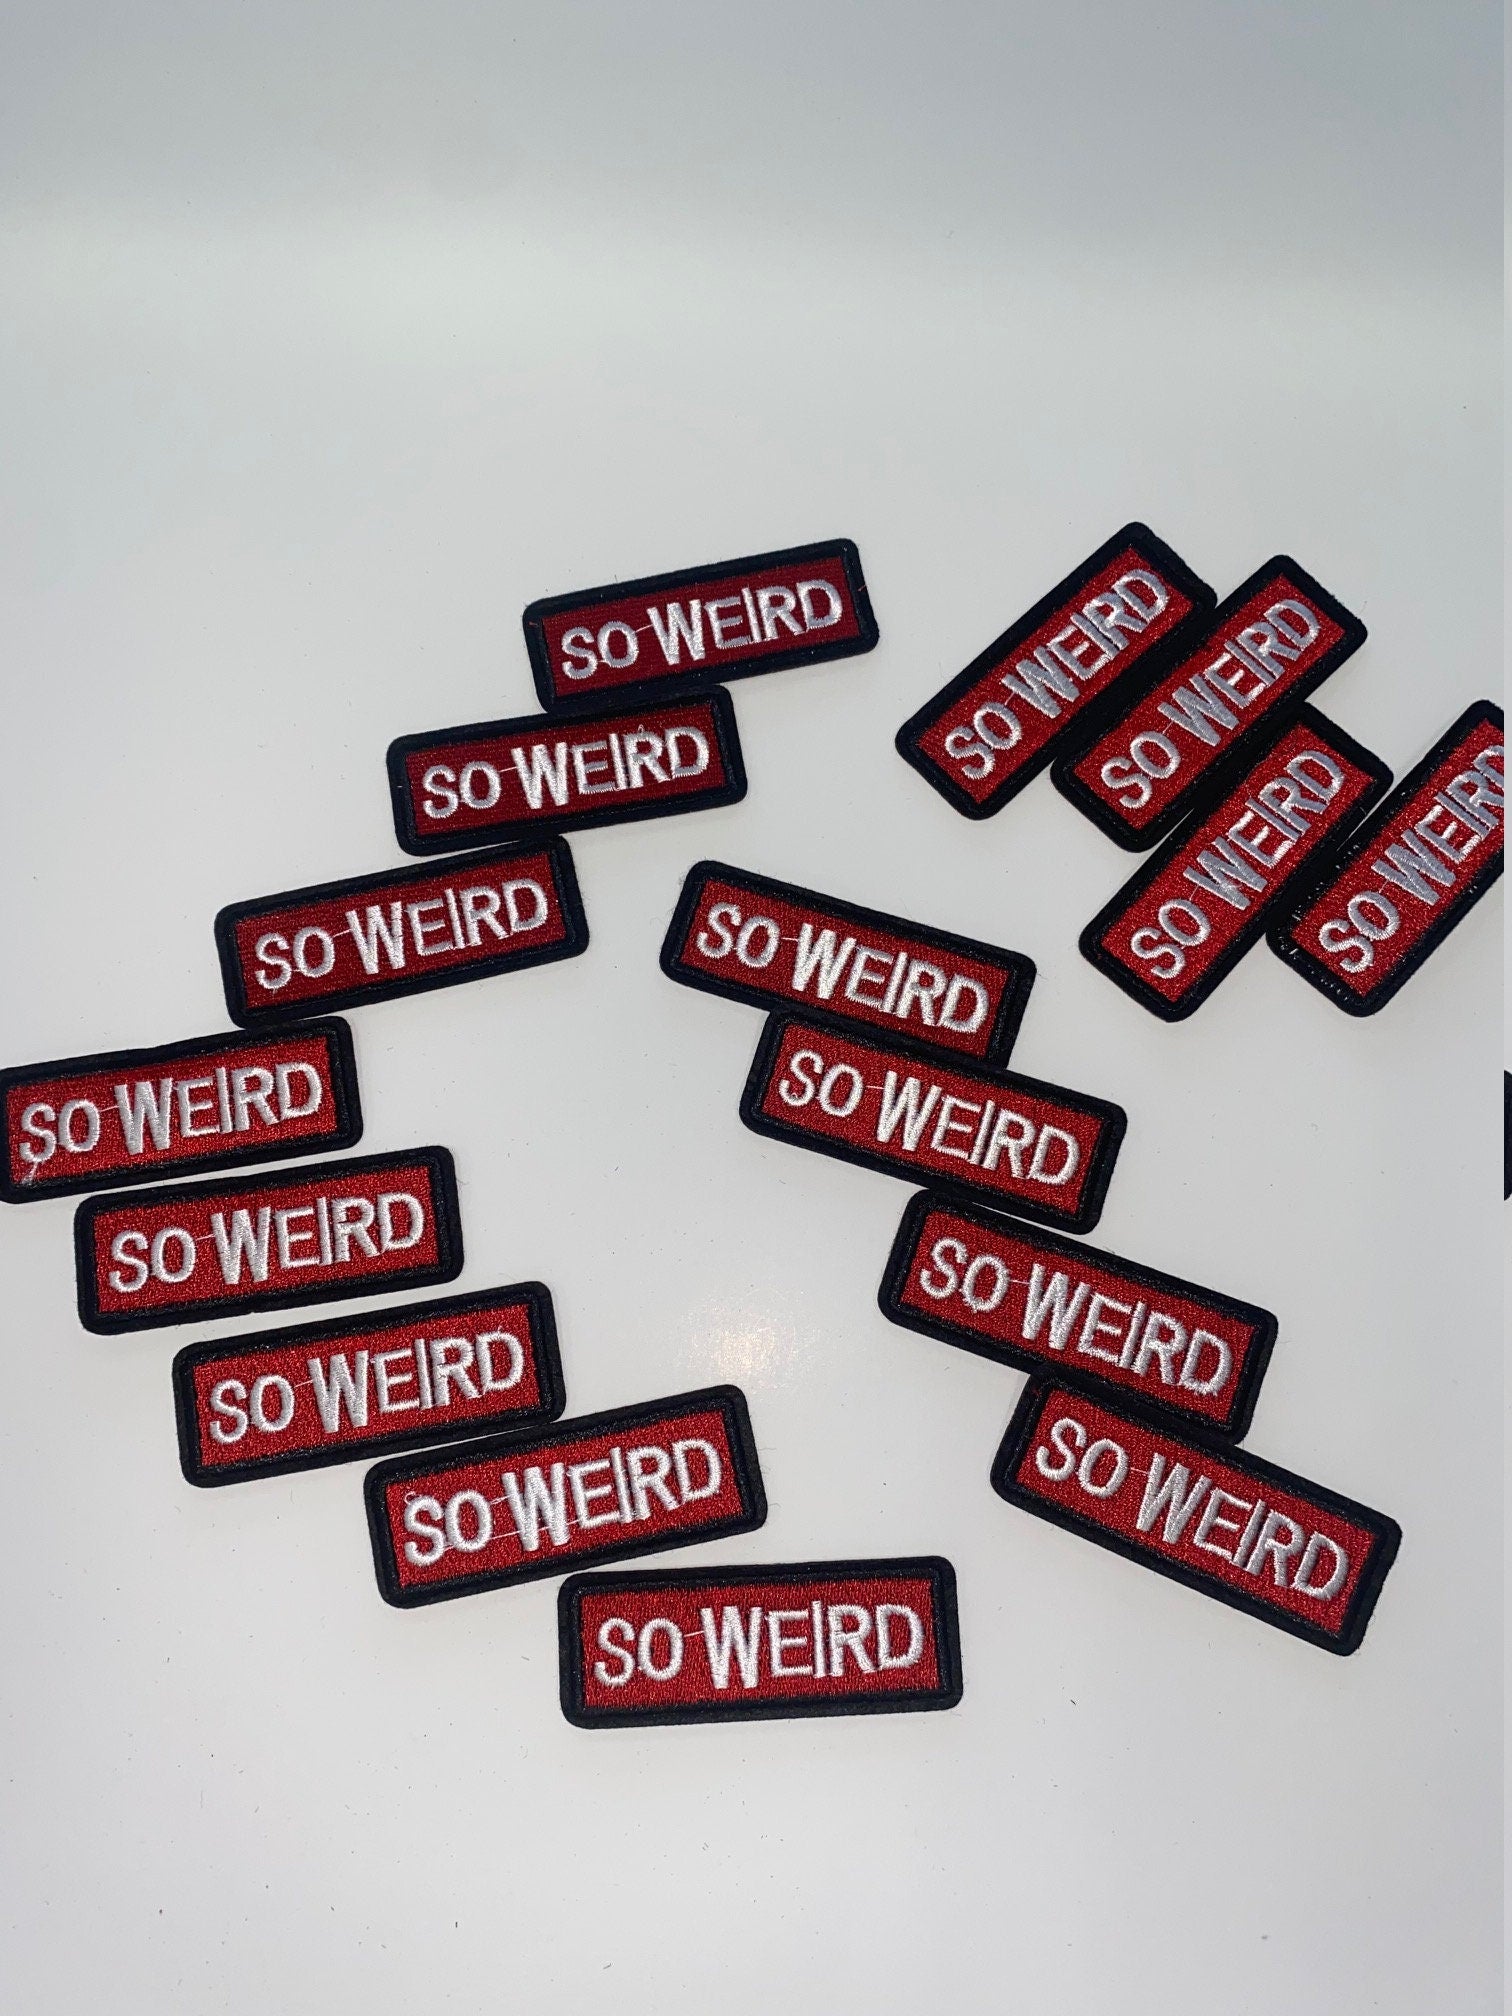 NEW ARRIVAL, "So Weird", 1-pc, Patch, Iron-On Embroidered Applique; Patch for Clothing, Size 3"x1", DIY Applique, Badge Patch